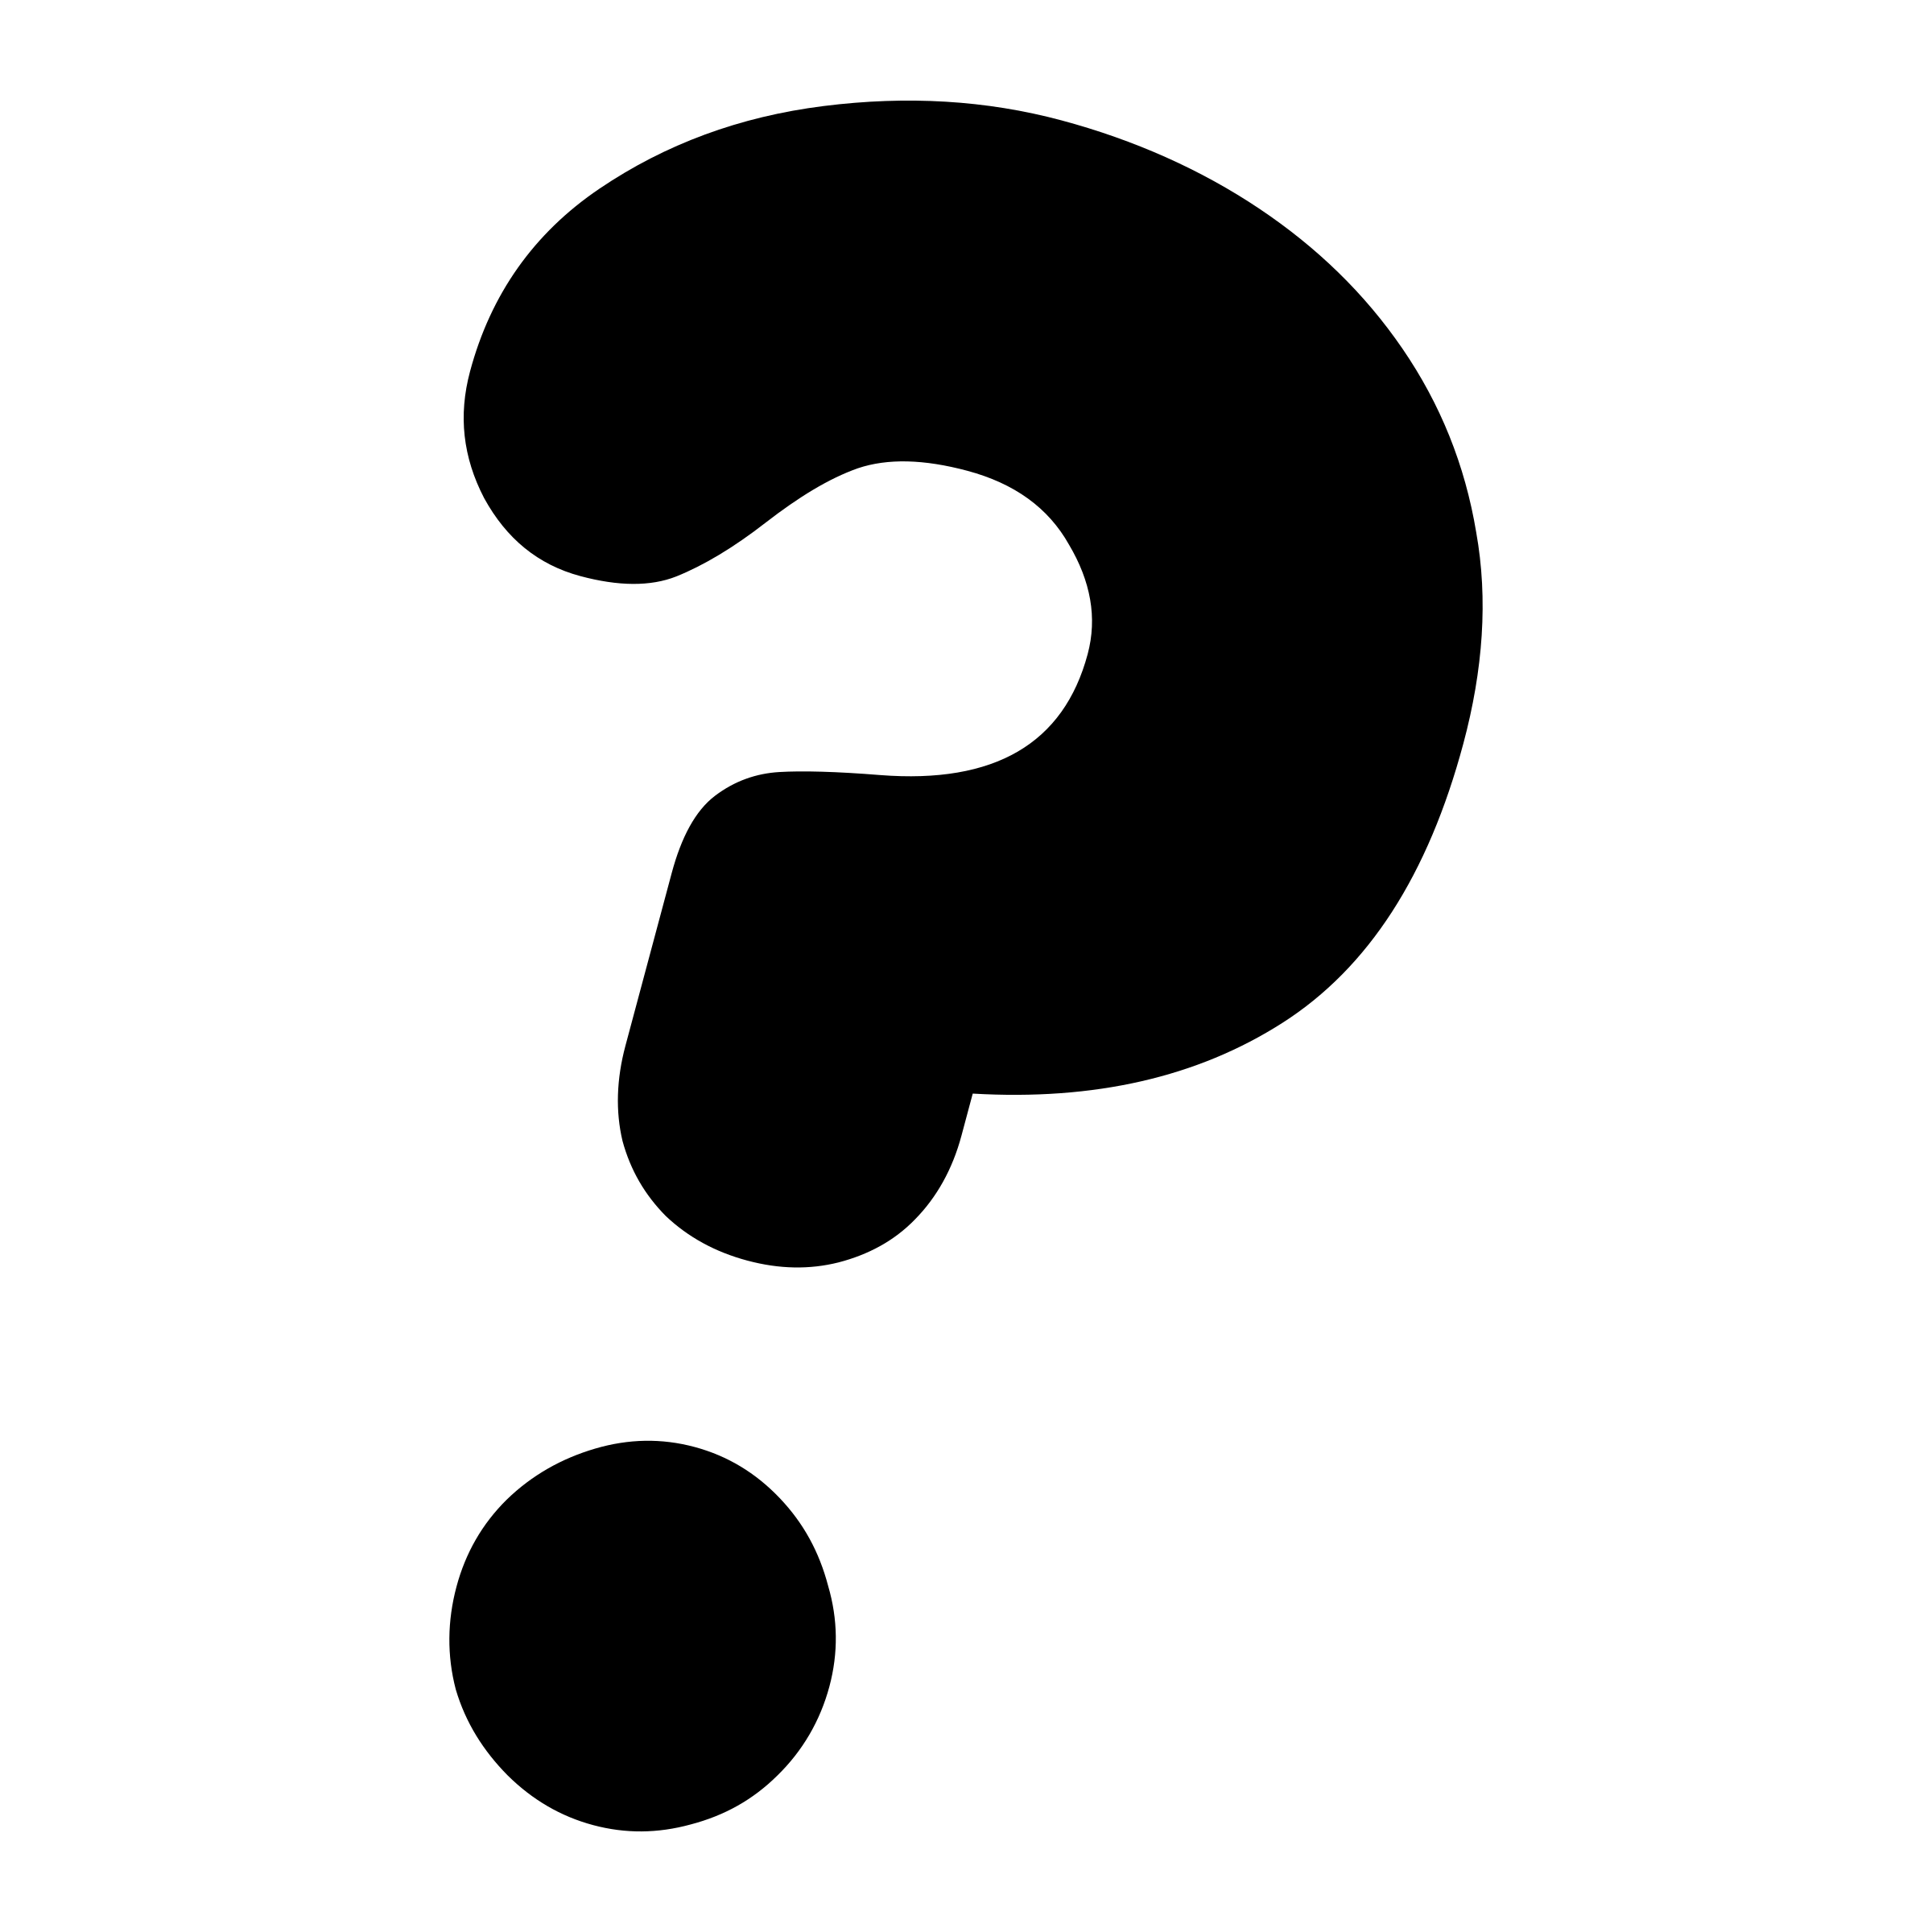 clipart picture of a question mark - photo #9